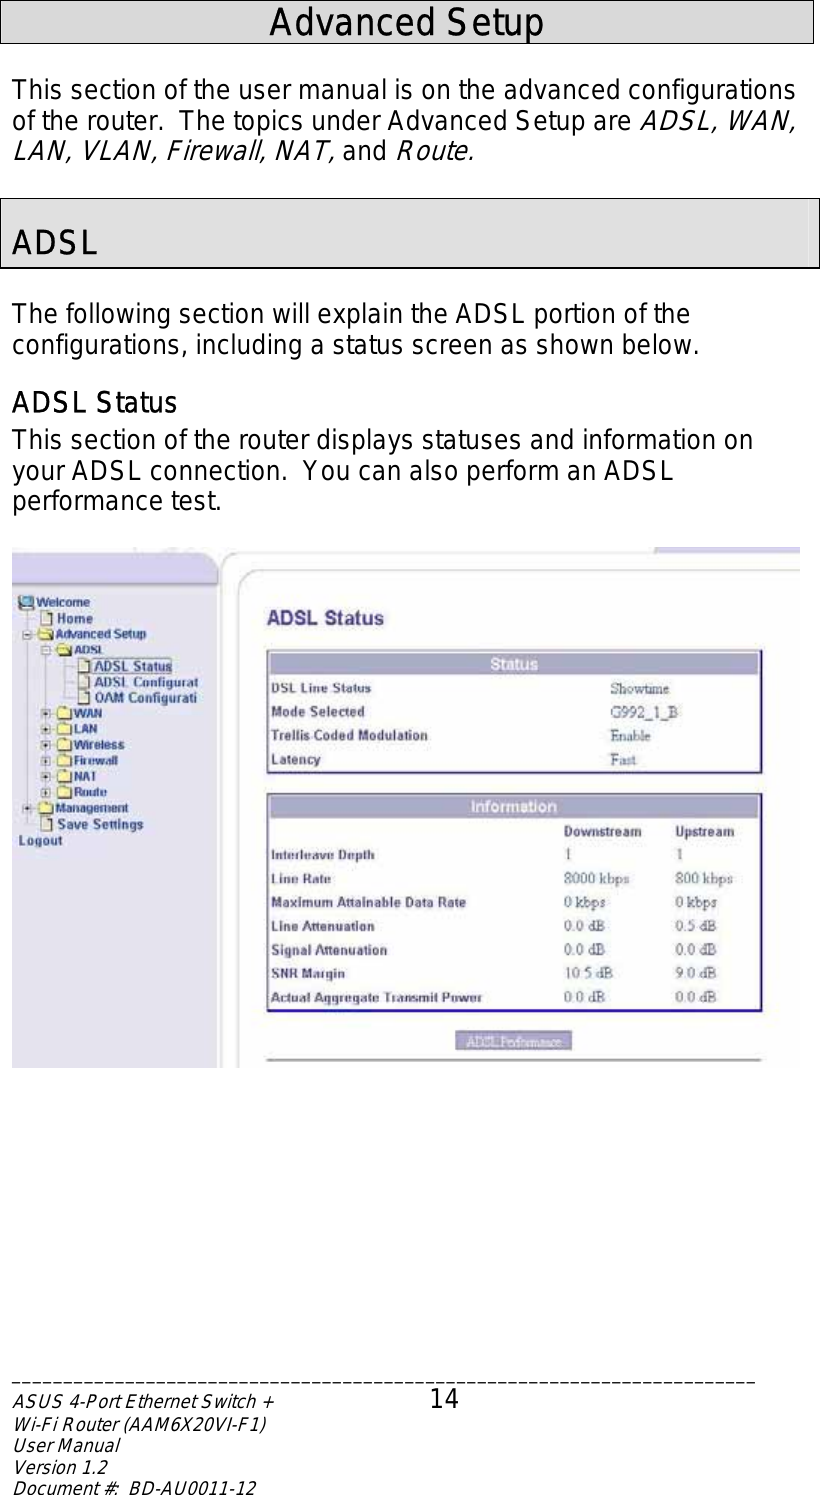  Advanced Setup  This section of the user manual is on the advanced configurations of the router.  The topics under Advanced Setup are ADSL, WAN, LAN, VLAN, Firewall, NAT, and Route.  ADSL  The following section will explain the ADSL portion of the configurations, including a status screen as shown below. ADSL Status This section of the router displays statuses and information on your ADSL connection.  You can also perform an ADSL performance test.    ________________________________________________________________________ASUS 4-Port Ethernet Switch +  14 Wi-Fi Router (AAM6X20VI-F1) User Manual                                                                         Version 1.2 Document #:  BD-AU0011-12  